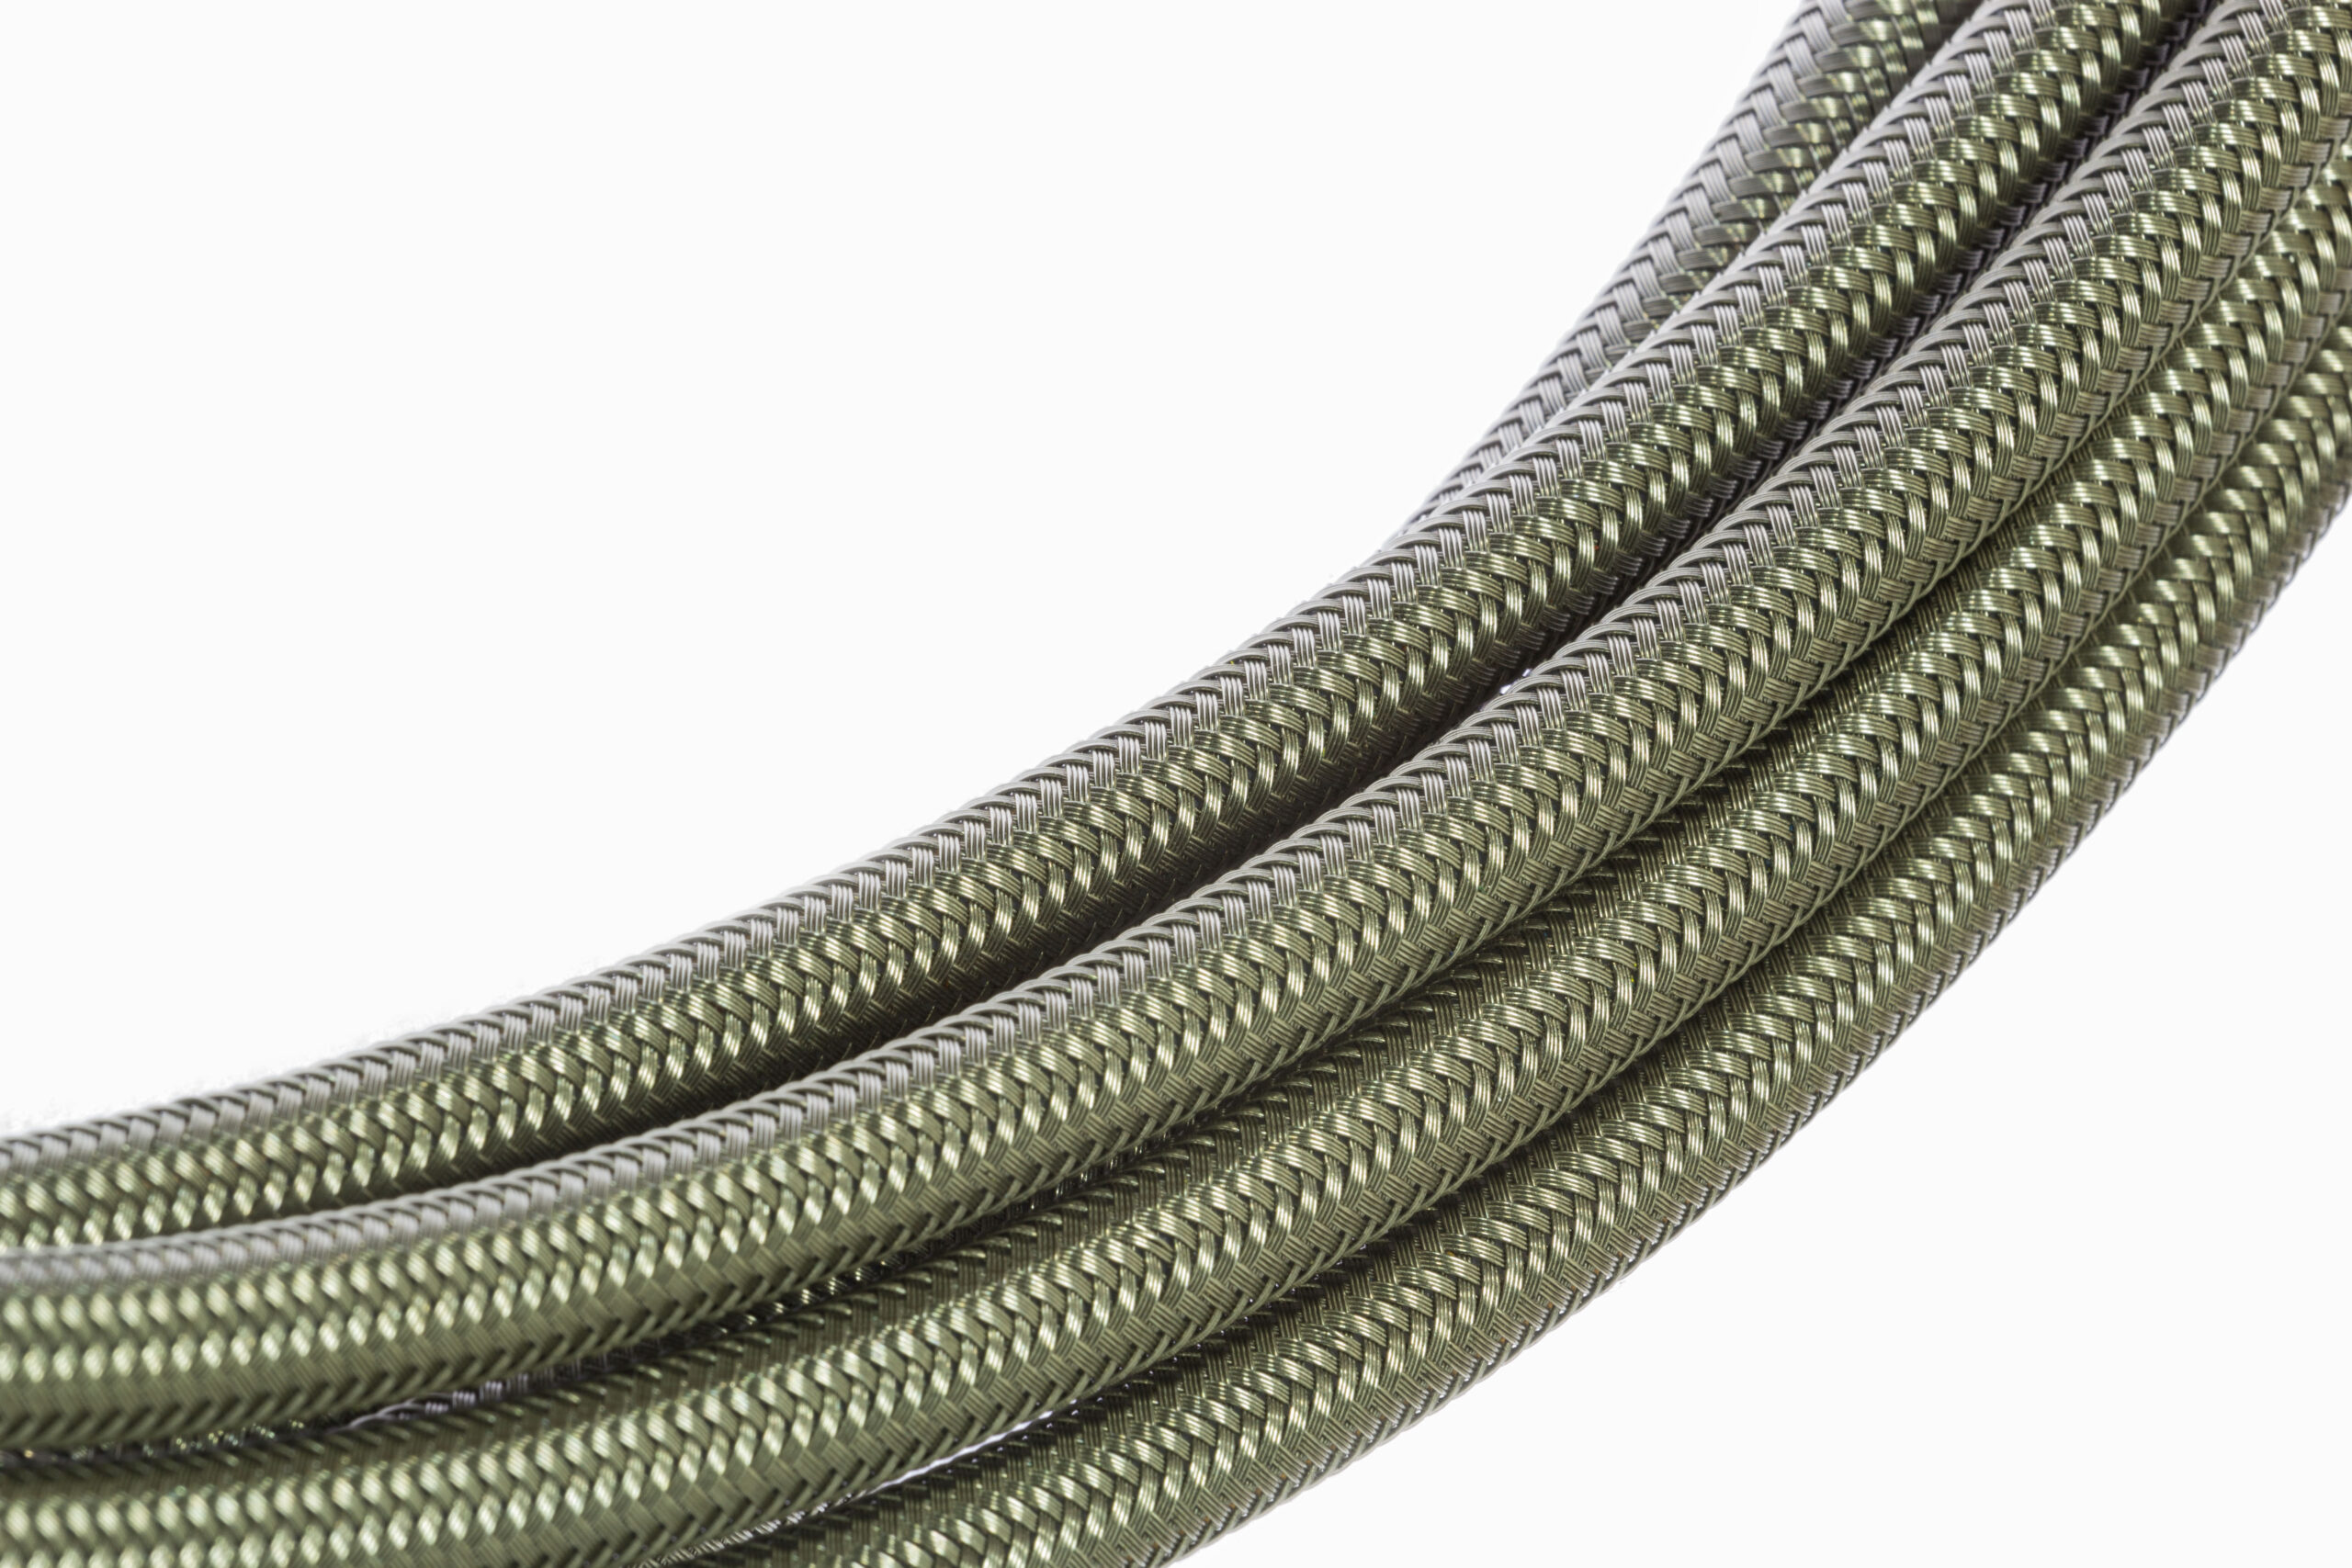 The Benefits of Using Braided Hoses